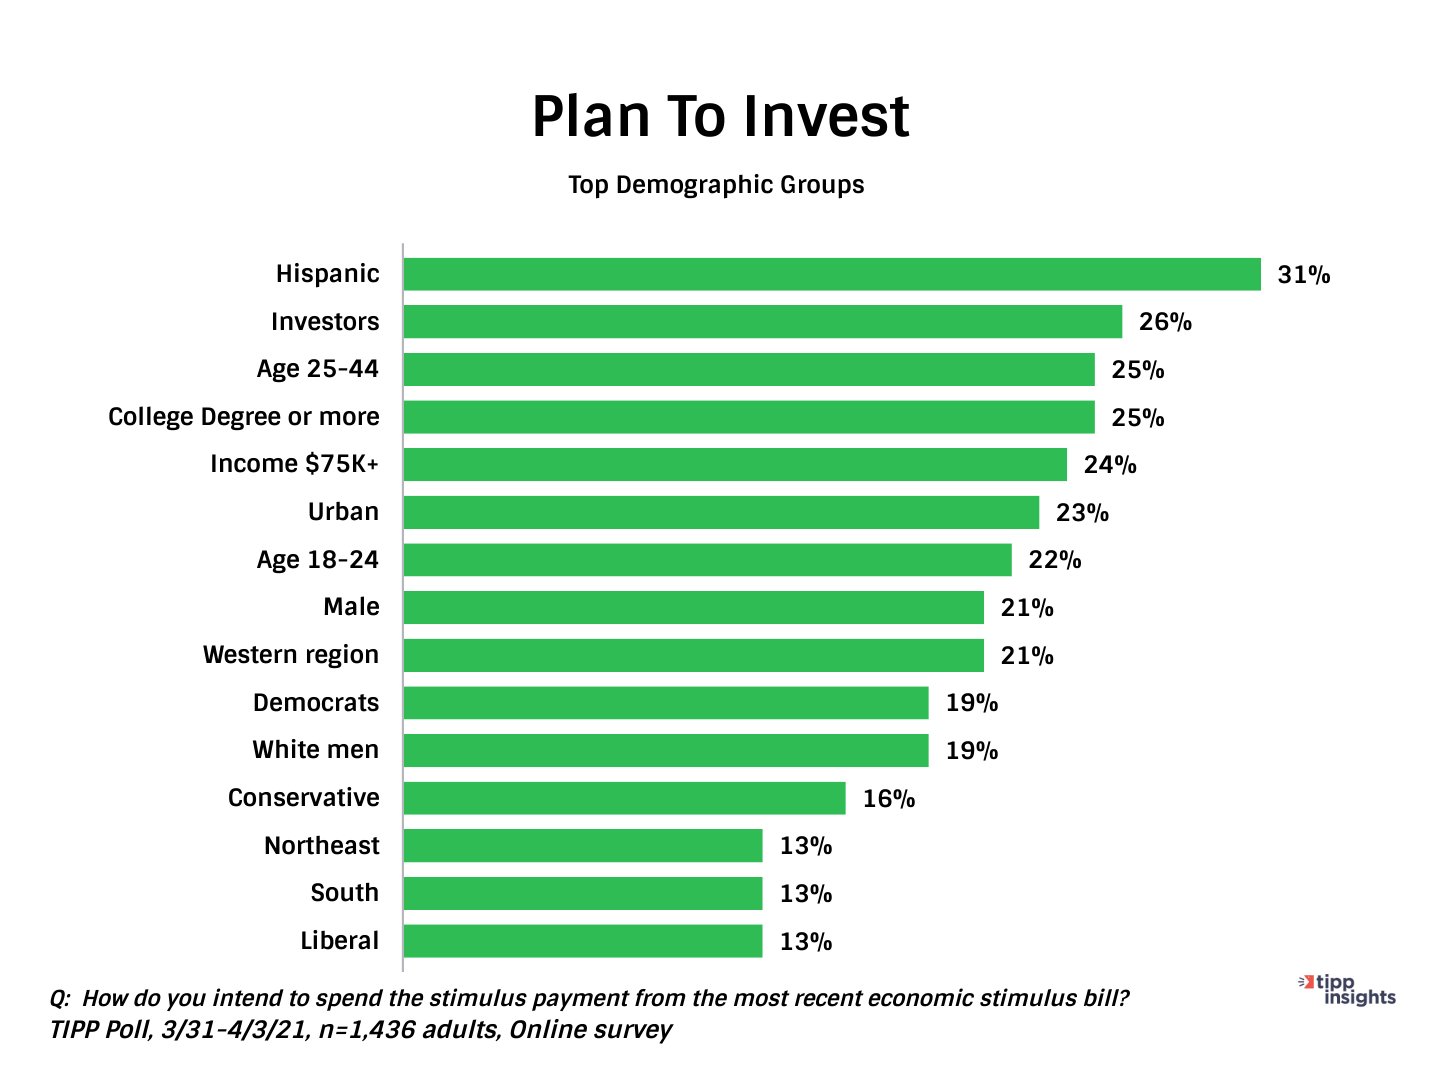 TIPP Poll Results: Americans intent to invest stimulus checks